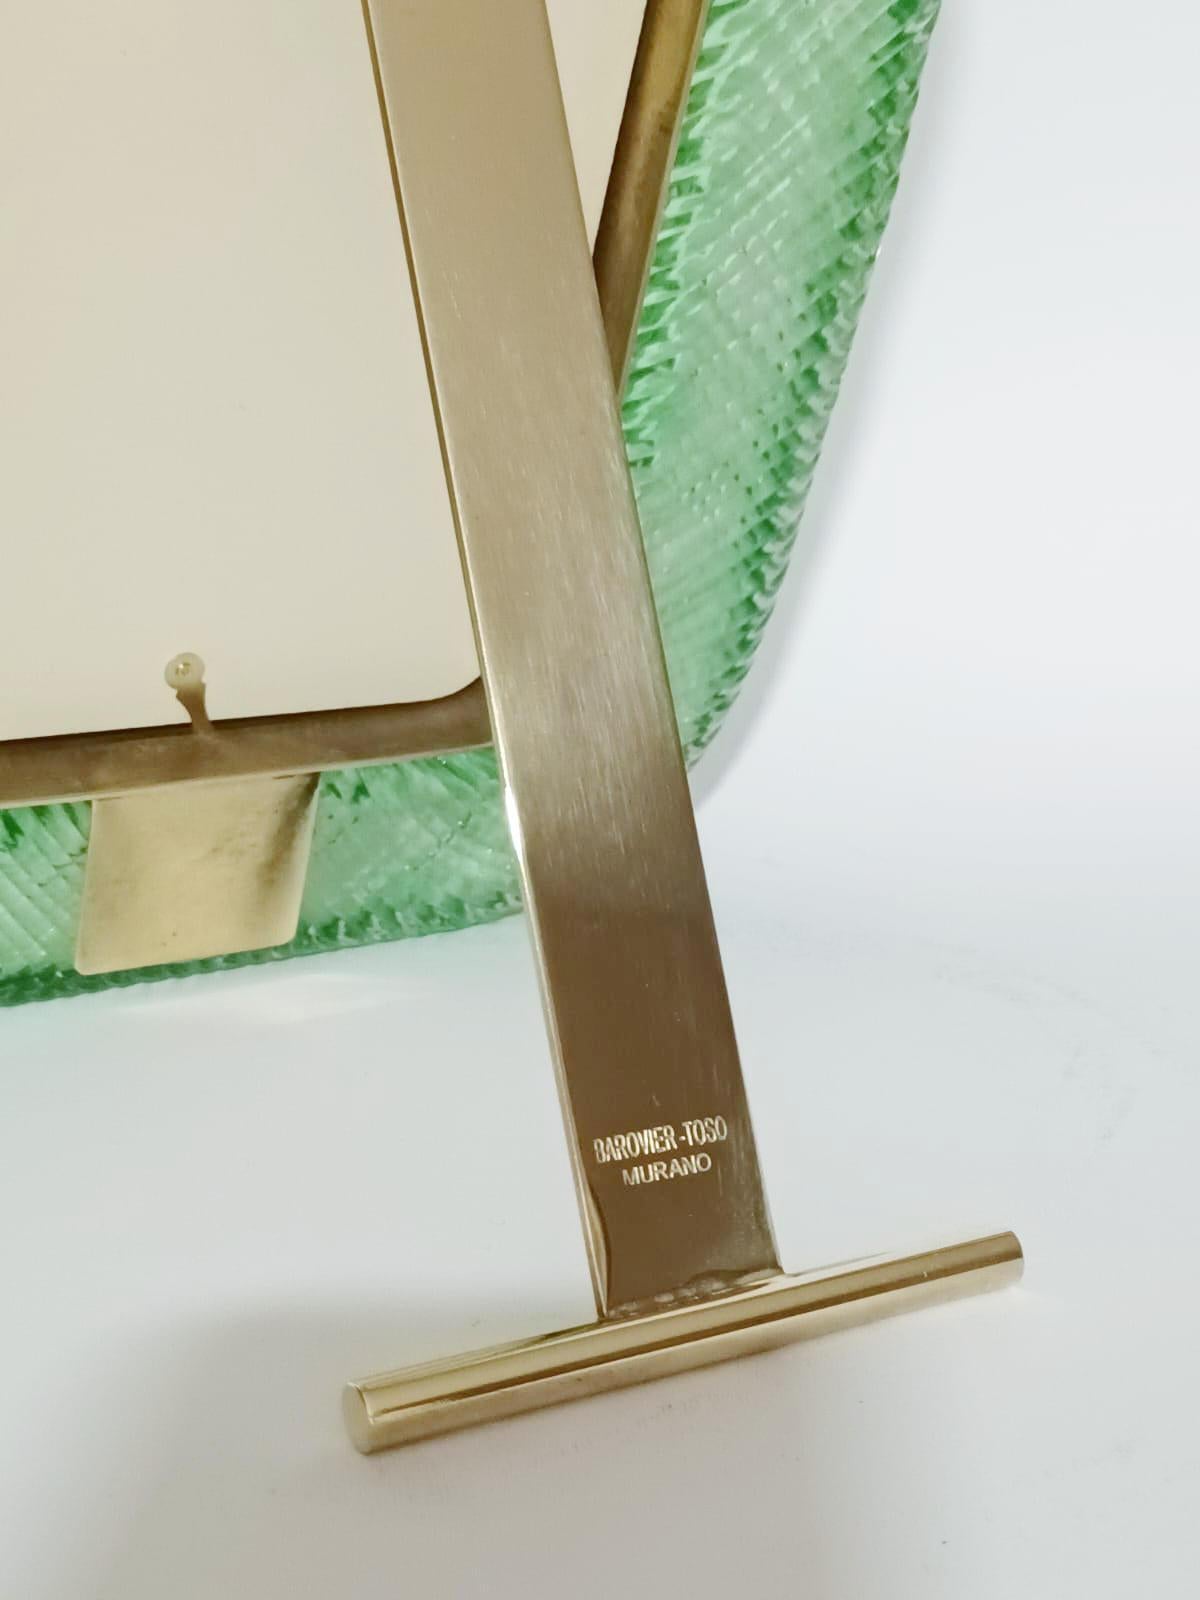 20th Century Murano Green Photo Frame by Barovier e Toso - 3 Available For Sale